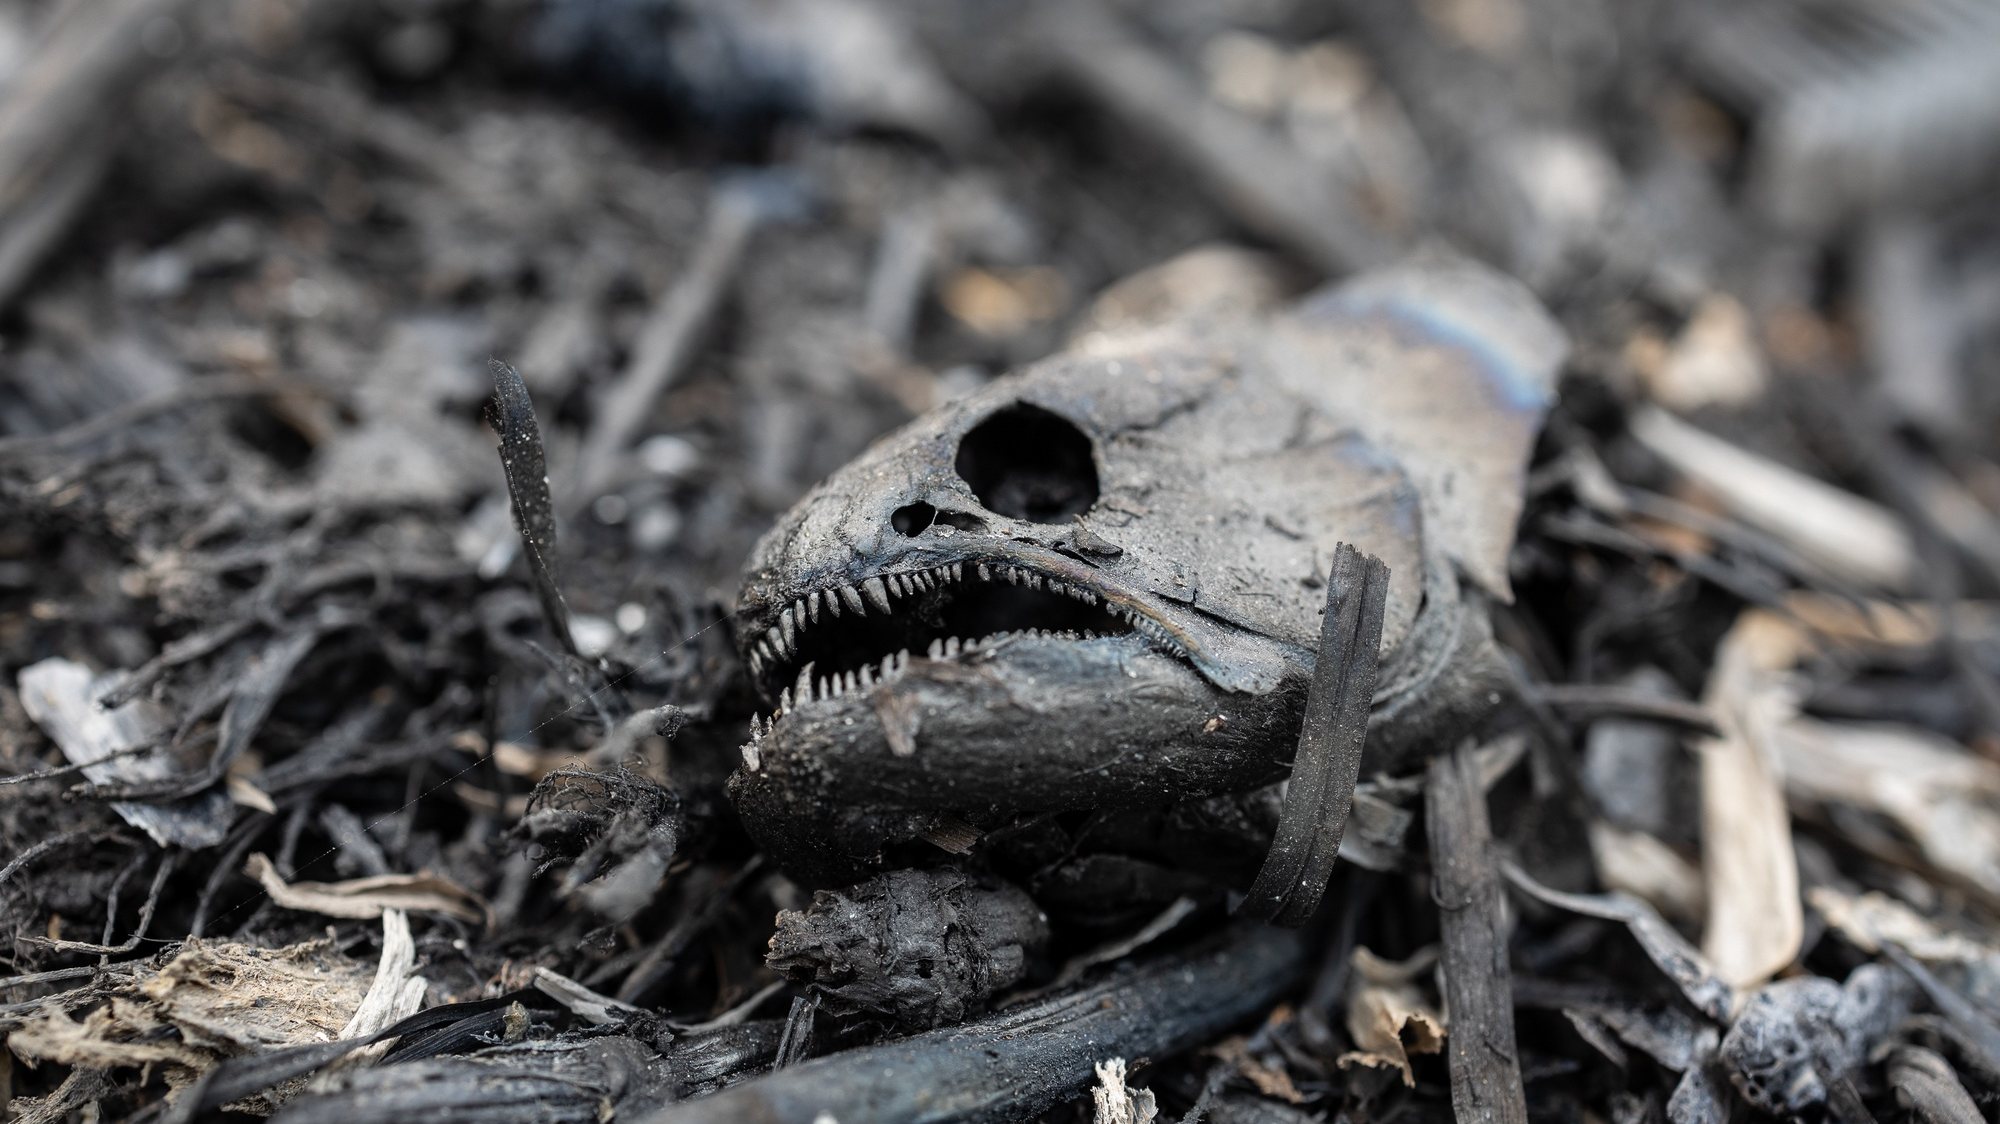 epa10987882 A burnt carcass of a piranha lies on the ground after a large fire on the BR-262 highway in the Brazilian Pantanal, in the city of Miranda, Brazil, on 19 November 2023 (issued 21 November 2023). The Brazilian Environmental Police are now searching for signs of animal life after fires raging in the Pantanal devastated large areas of the largest wetland on the planet.  EPA/ISAAC FONTANA  ATTENTION: This Image is part of a PHOTO SET